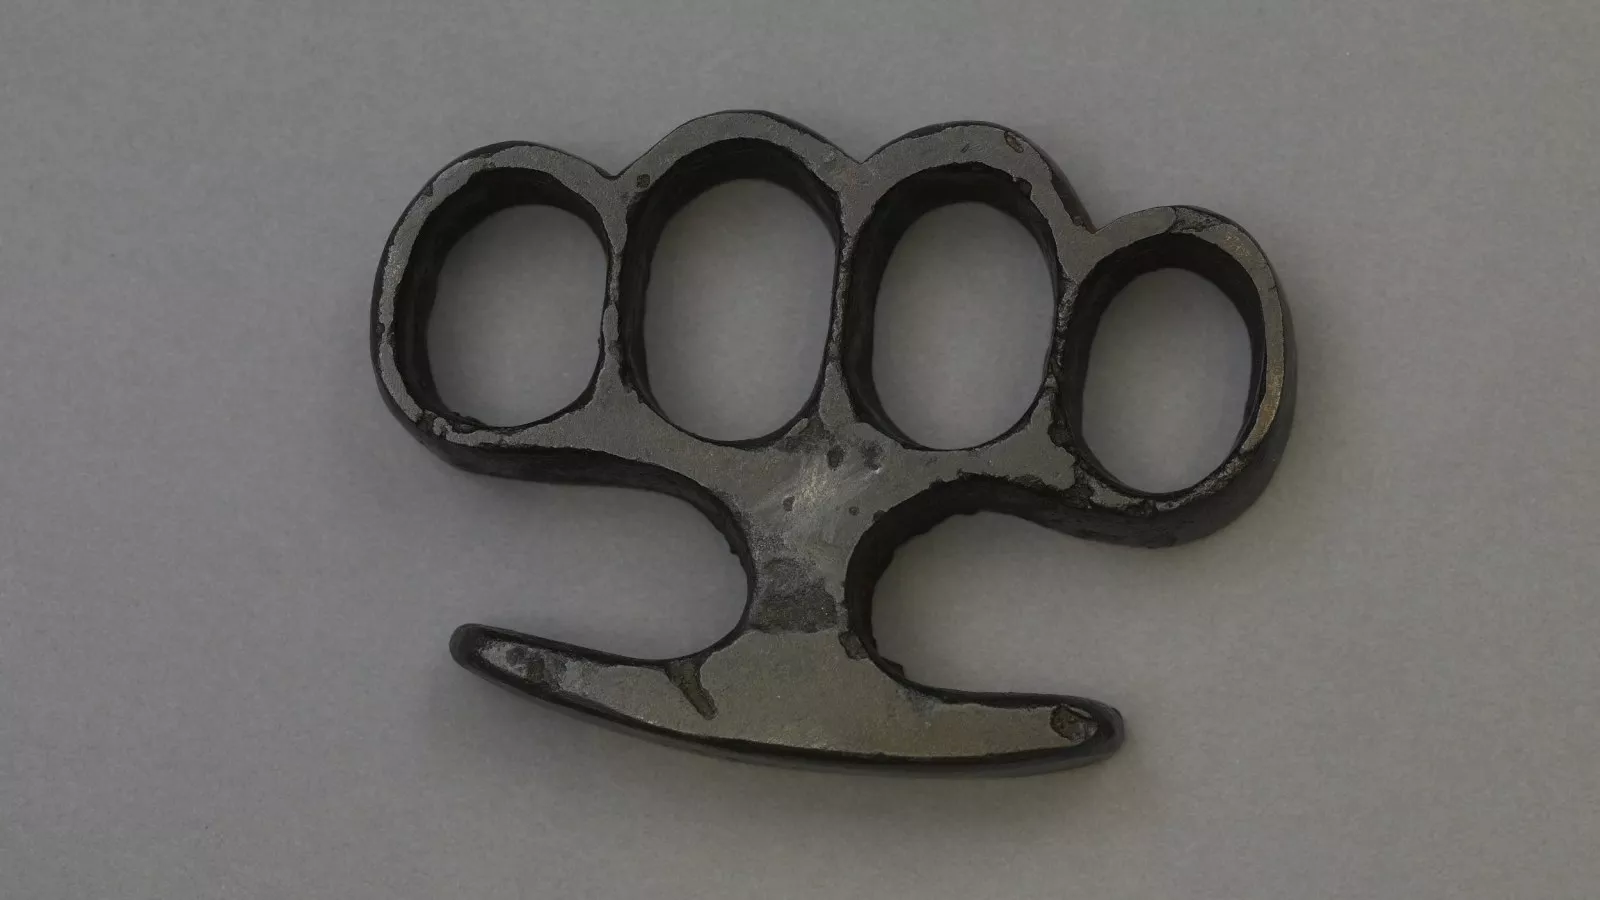 Texas set to end ban on brass knuckles | The Hill